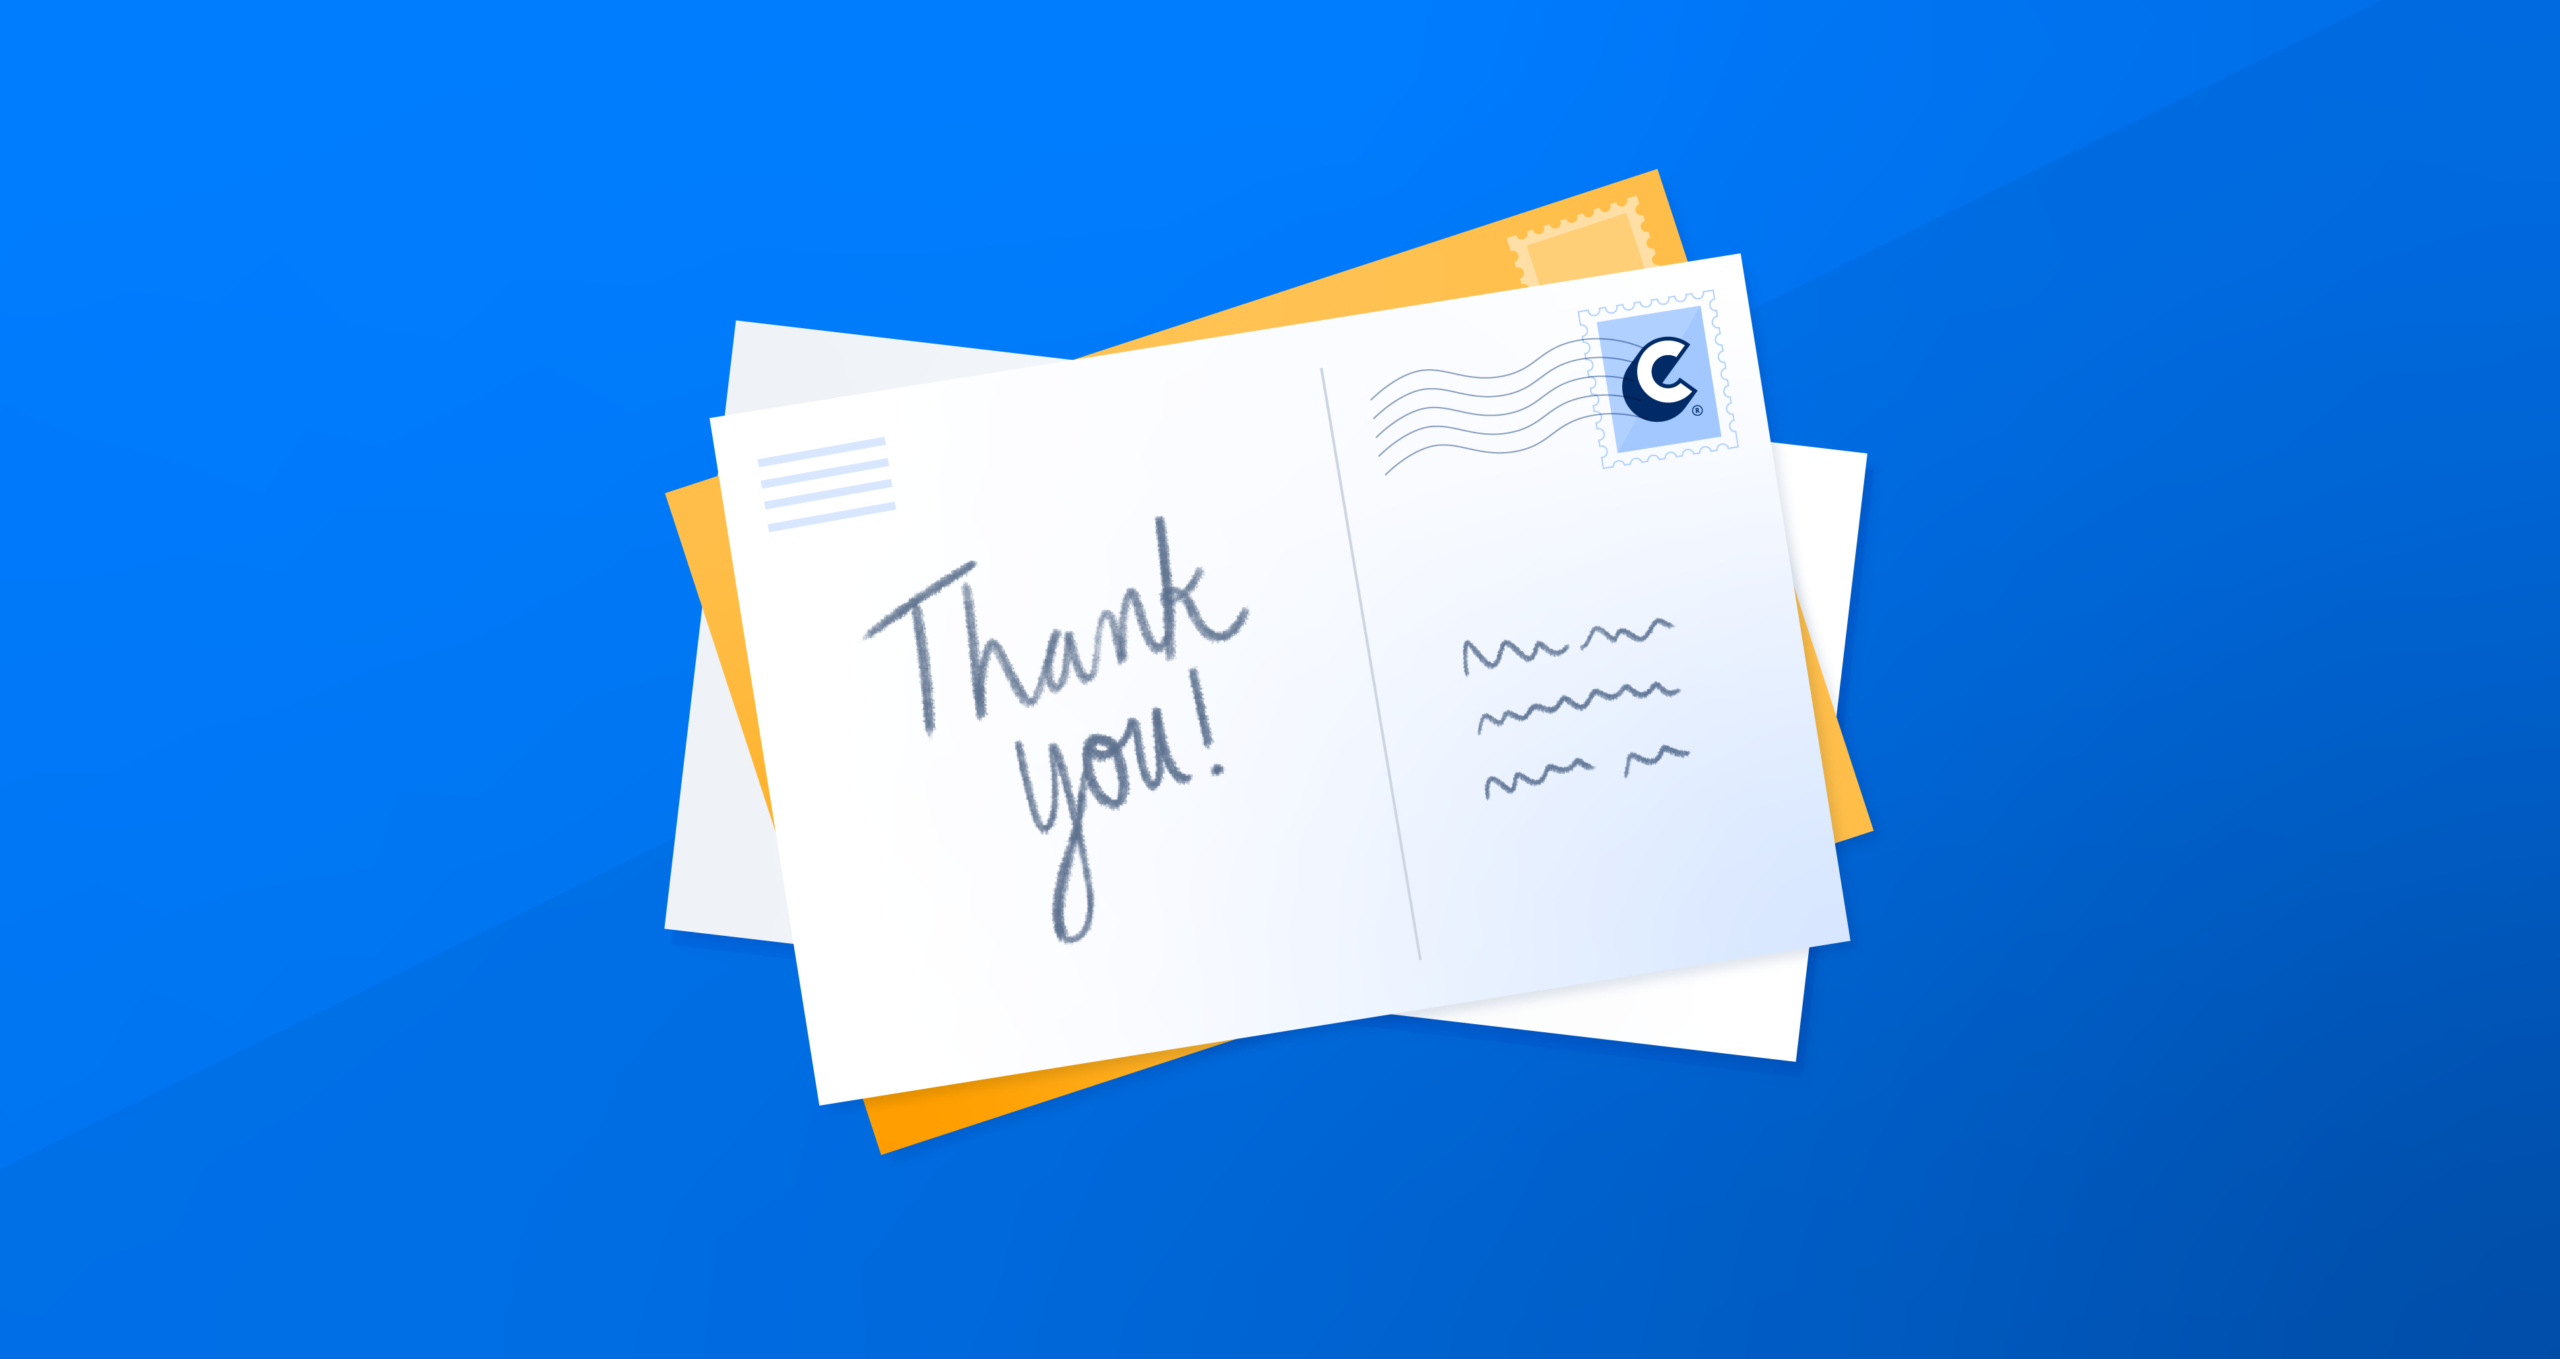 5 Ways to Thank Your Clients This Holiday Season